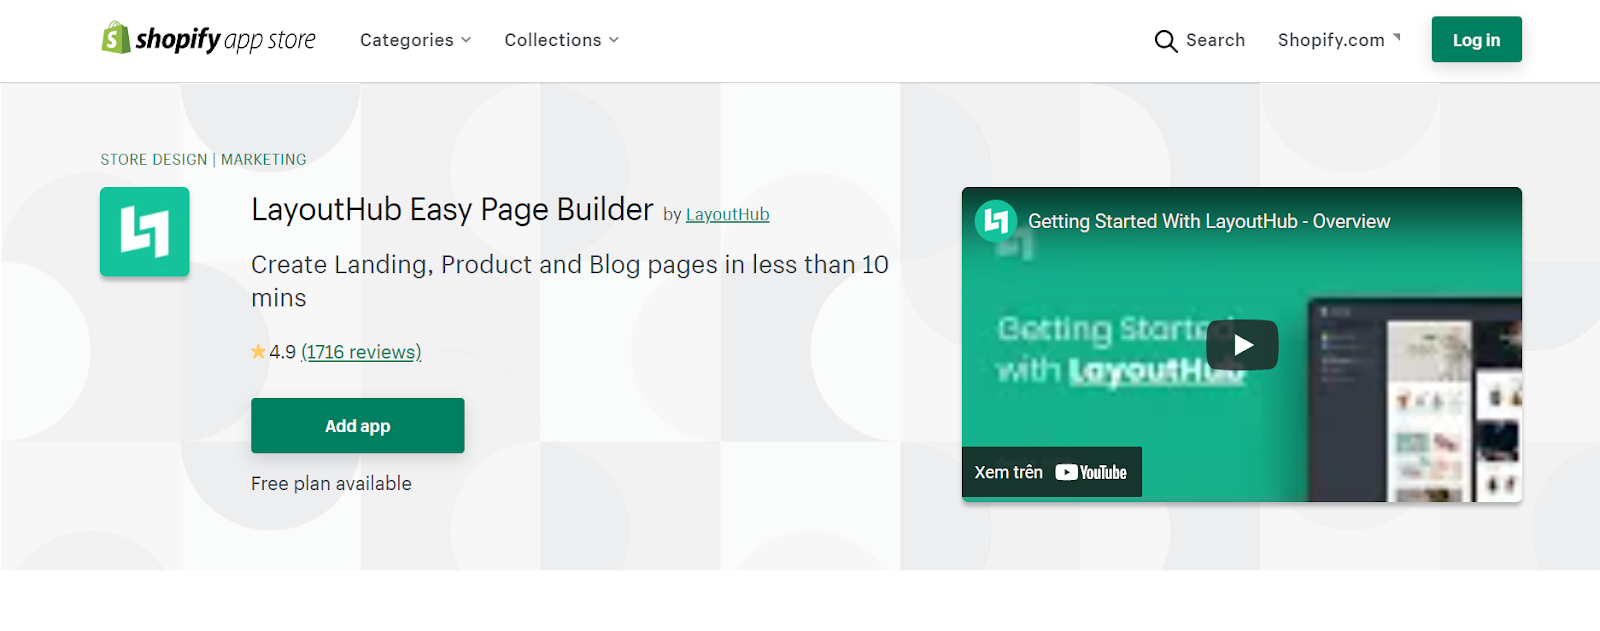 layout hub easy page builder